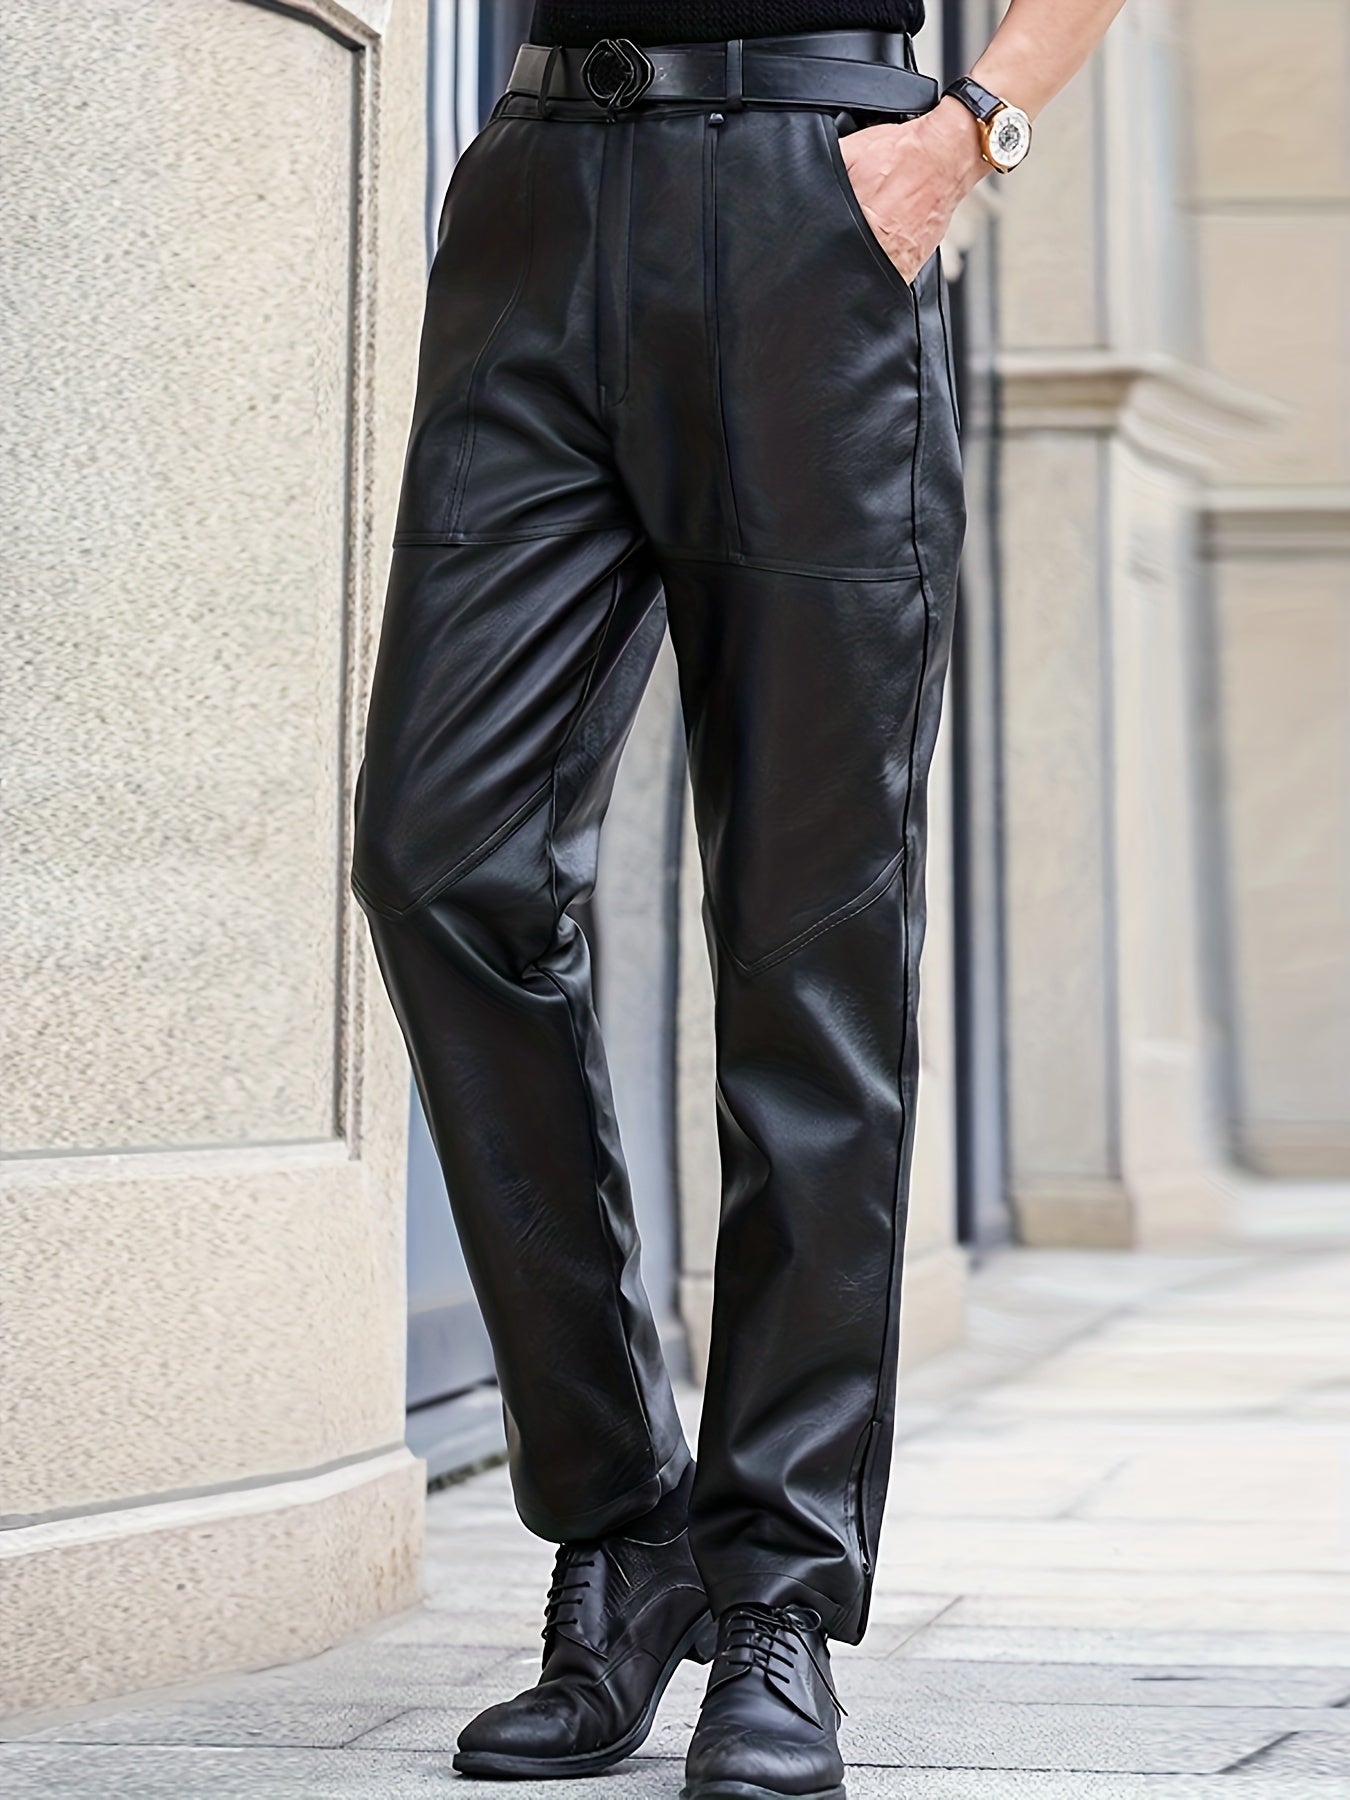 Solid Color Straight Pants Waist Drawstring Elastic PU Faux Leather Trouser , Men's Casual Slightly Stretchy Pants For Spring Fall